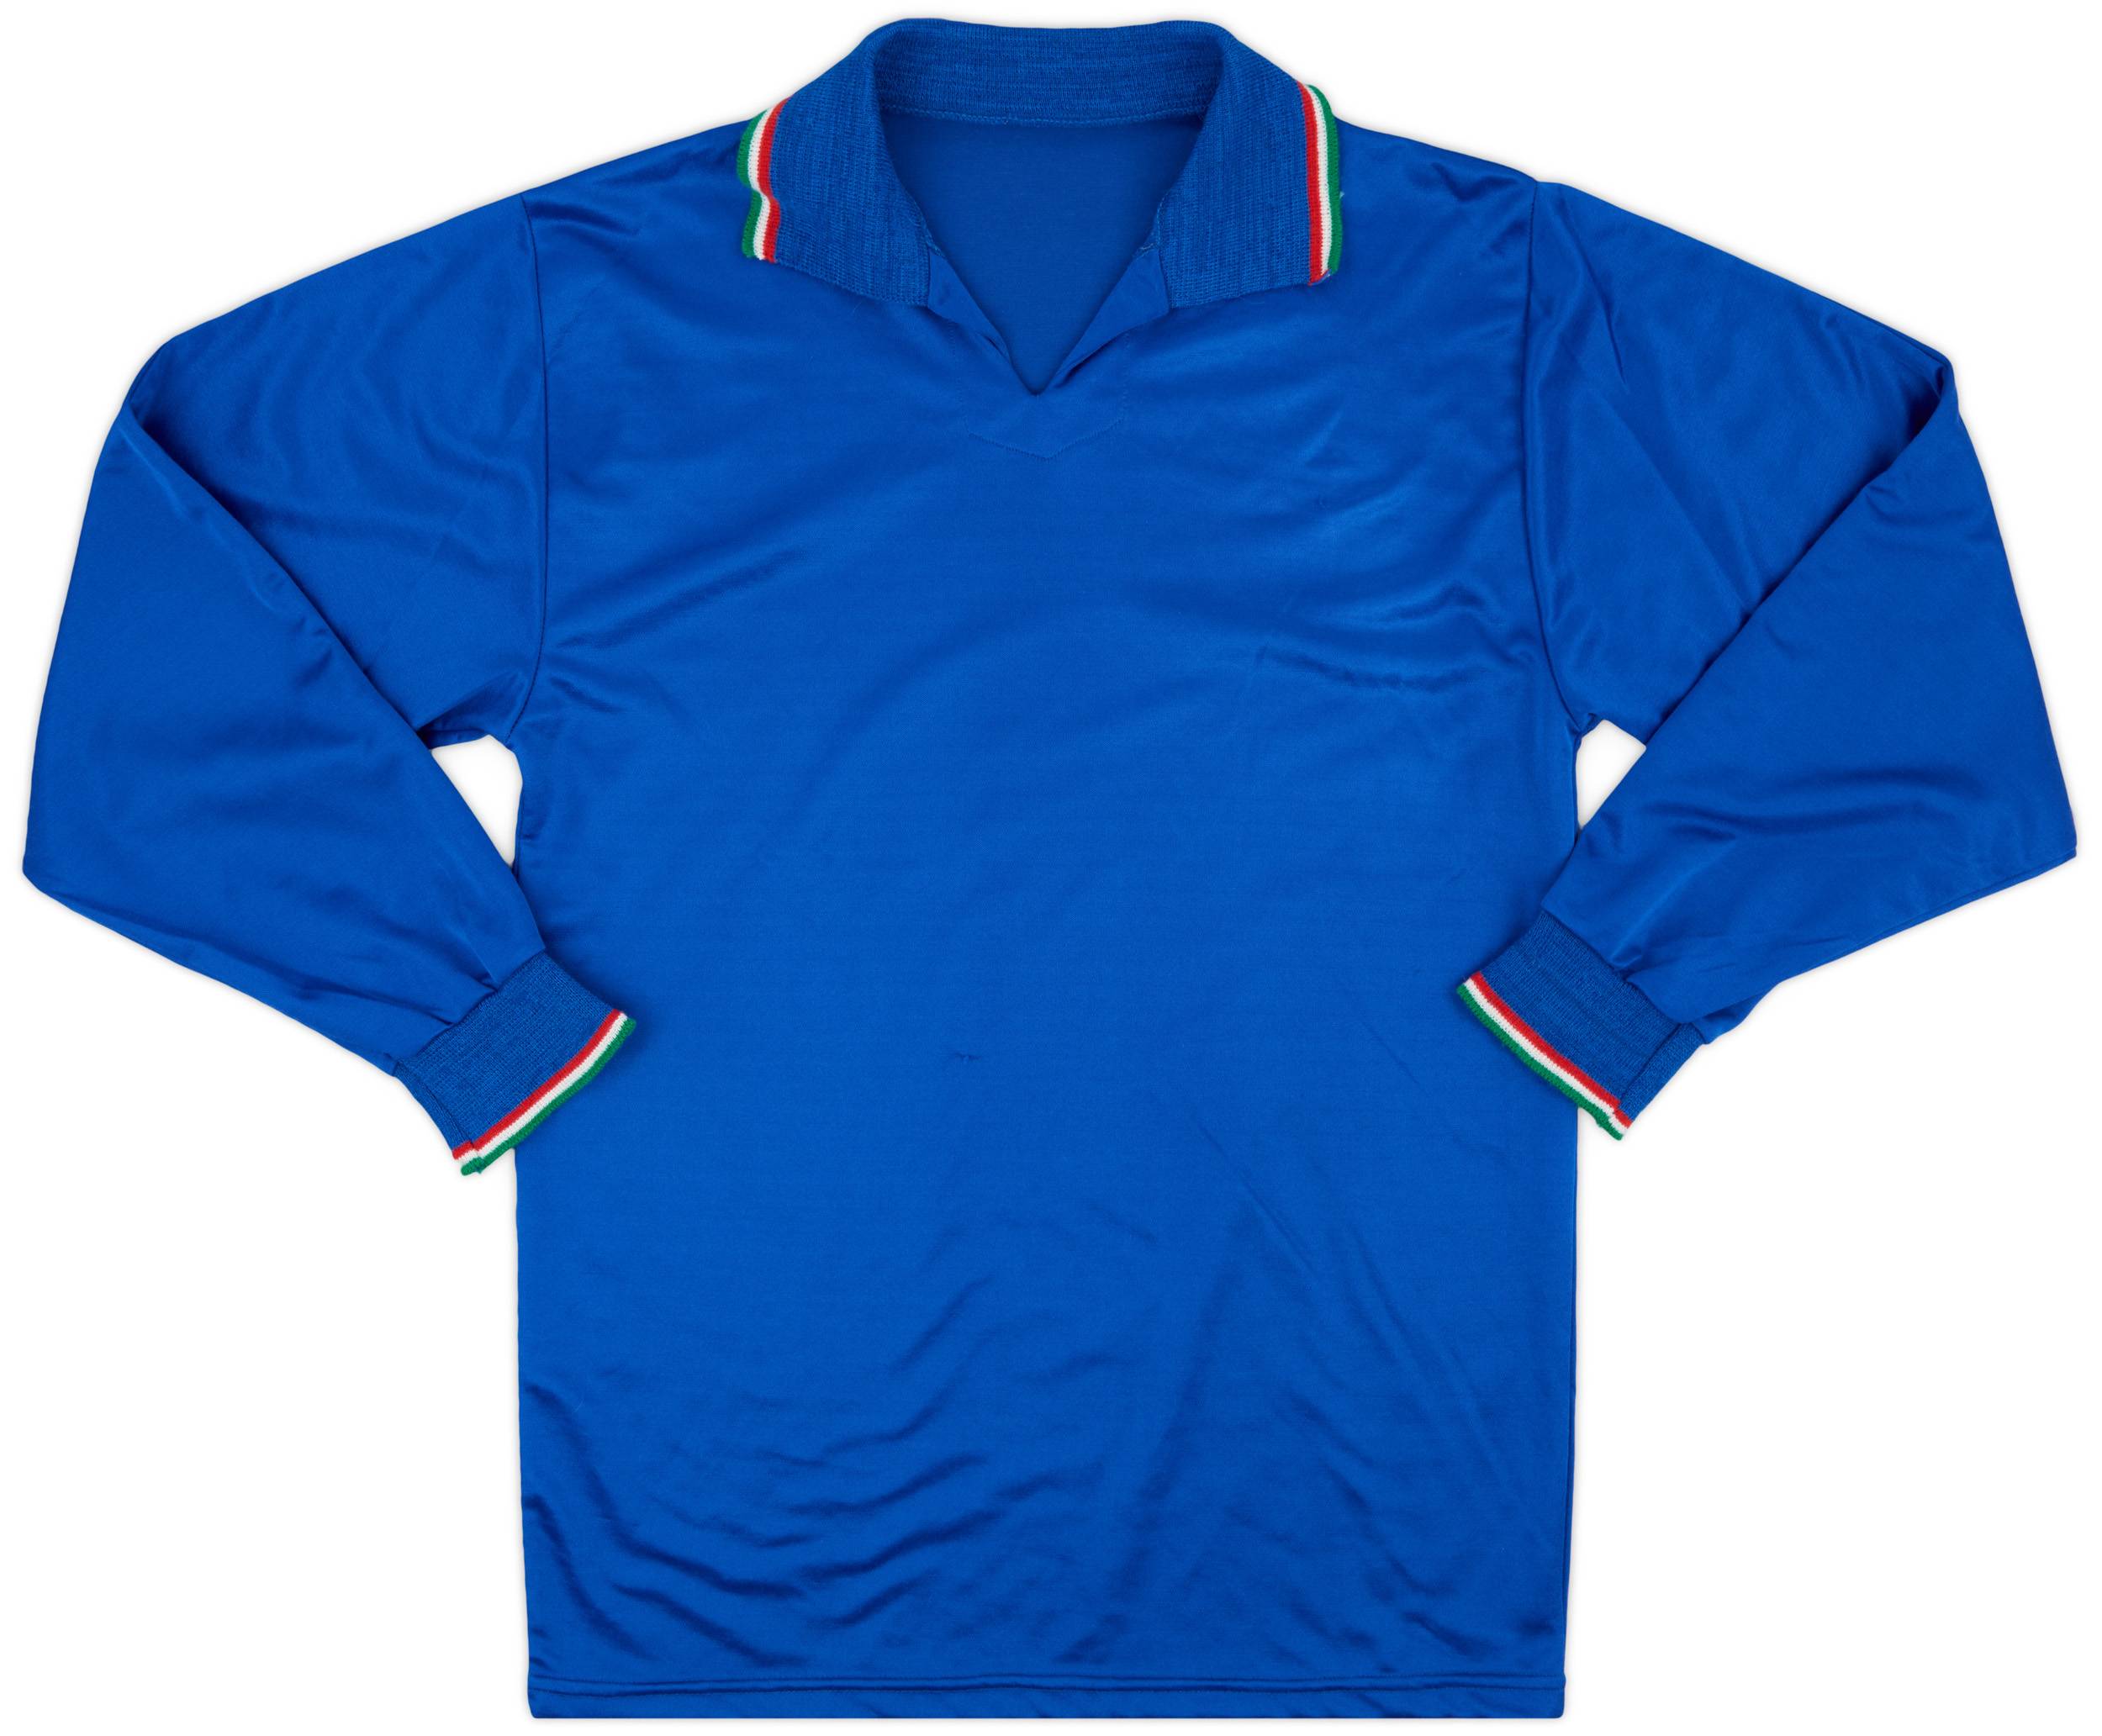 1986-91 Italy Home L/S Template - 8/10 - (M)